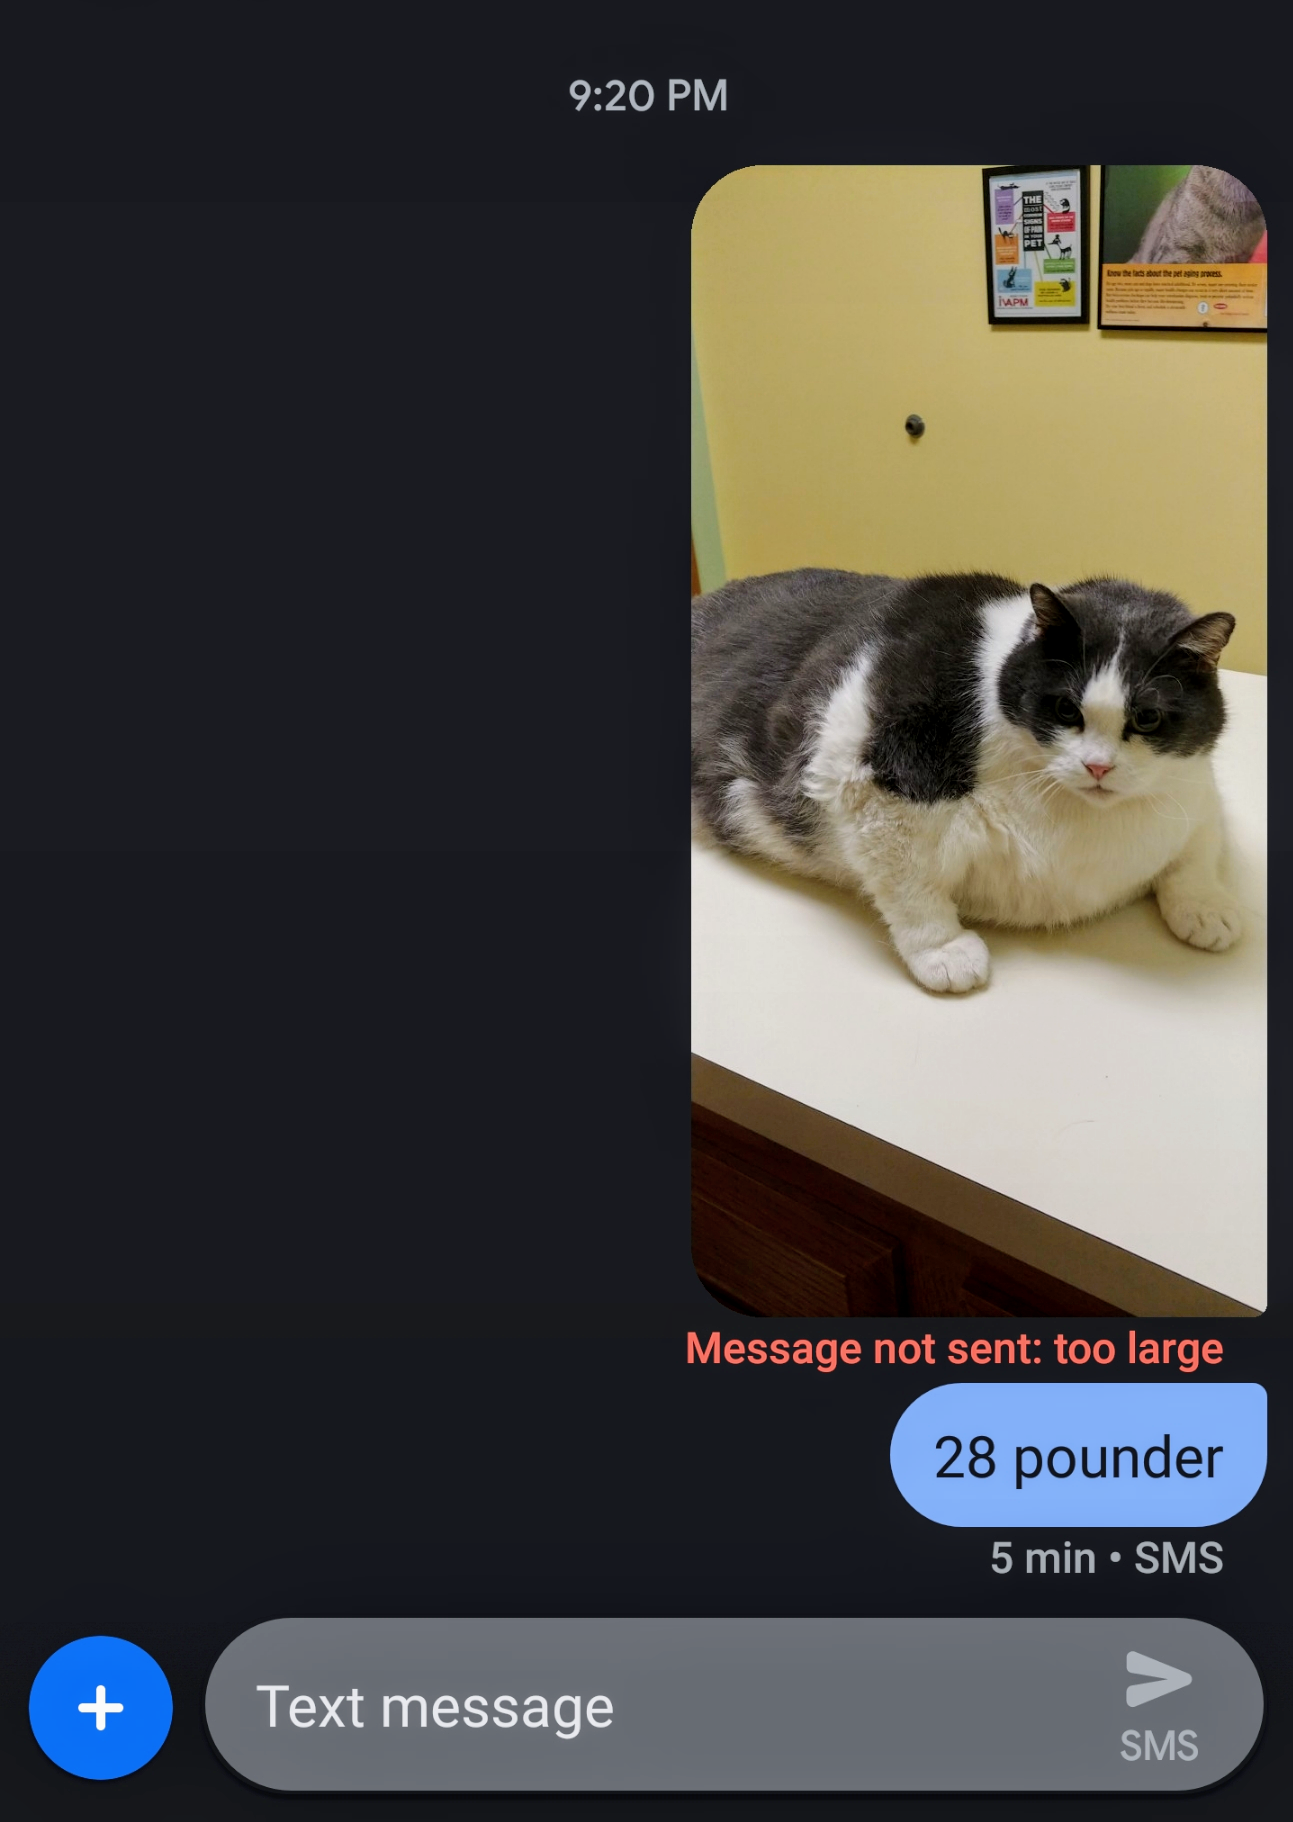 Tried to send a picture of the 28 pound cat I saw.